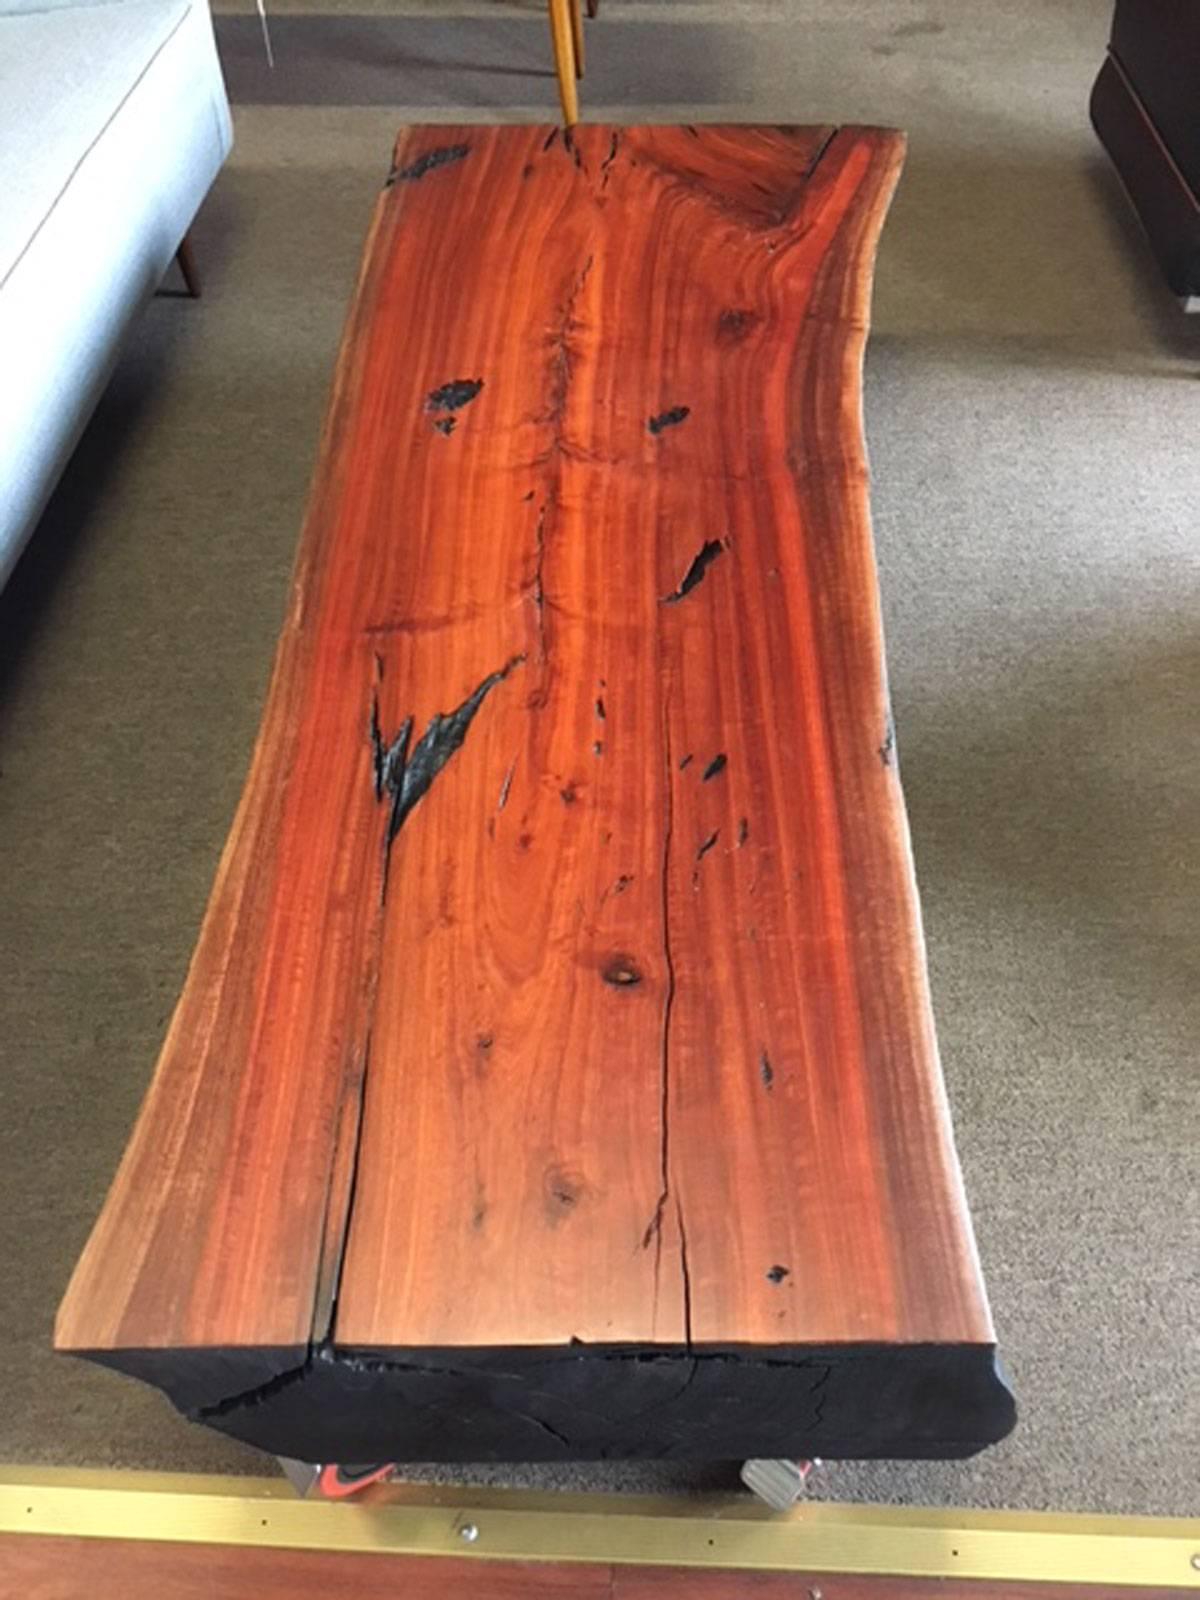 Shou-Sugi-Ban Eucalyptus Wood Coffee Table In Excellent Condition For Sale In Phoenix, AZ